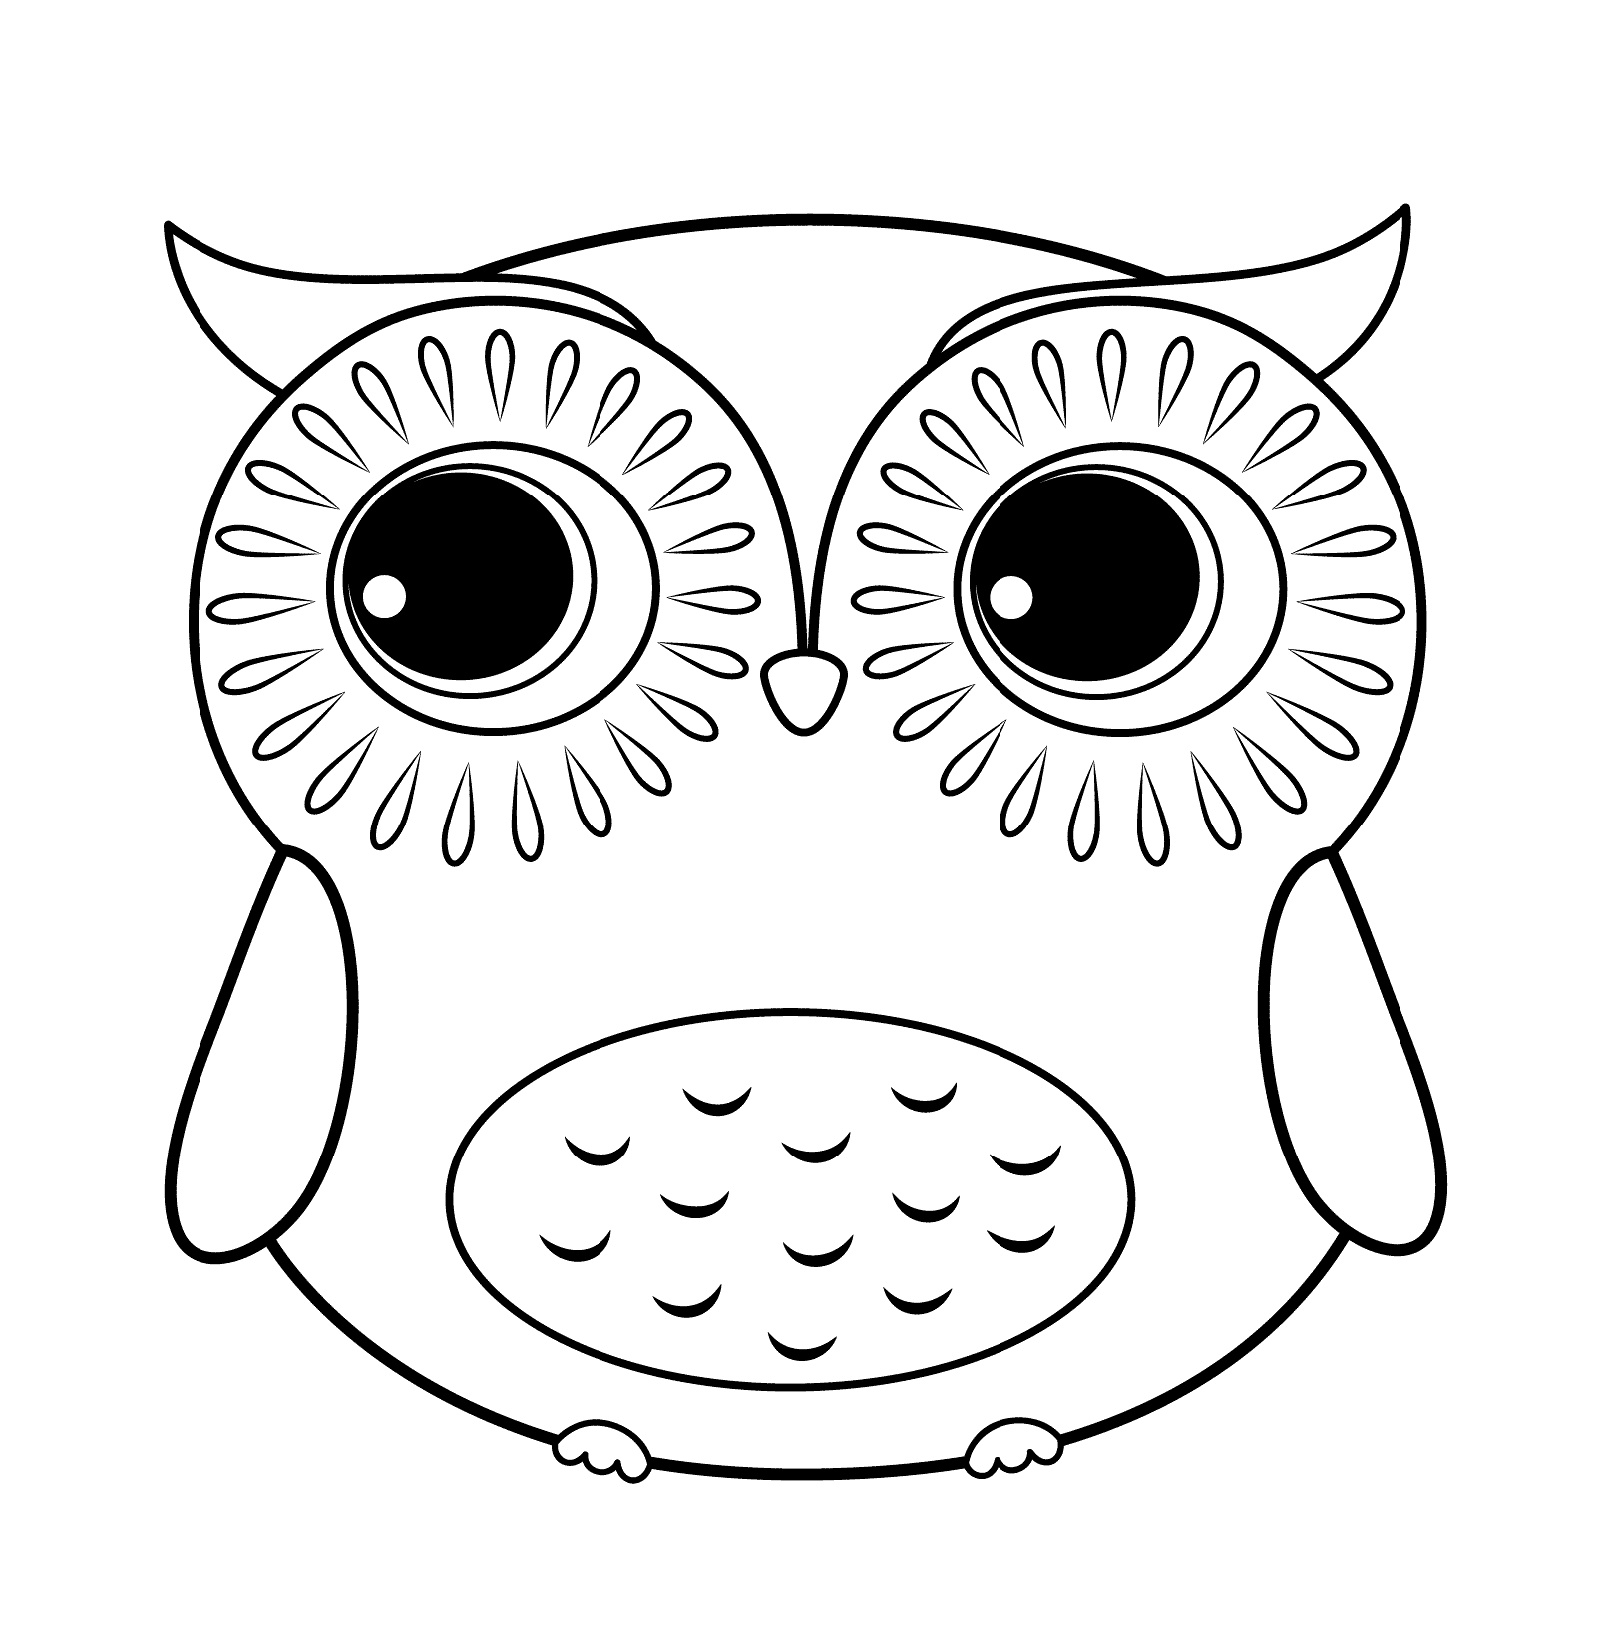 Coloring Book : Coloring Pages Cute Owl Printable K5 ...